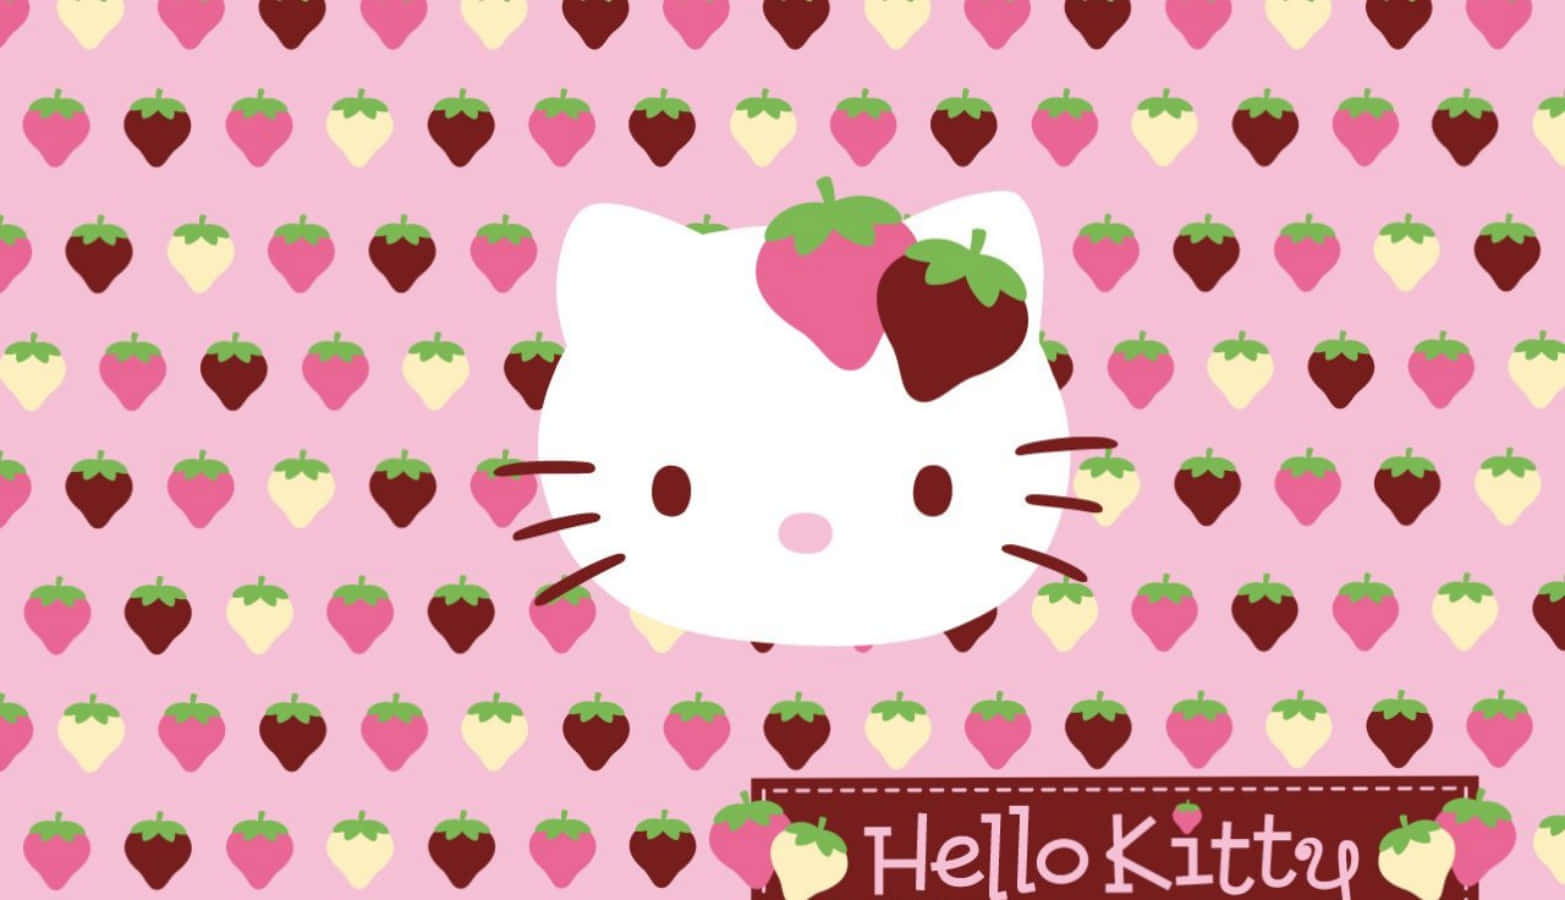 Get Ready For School With A Fun & Functional Hello Kitty Laptop